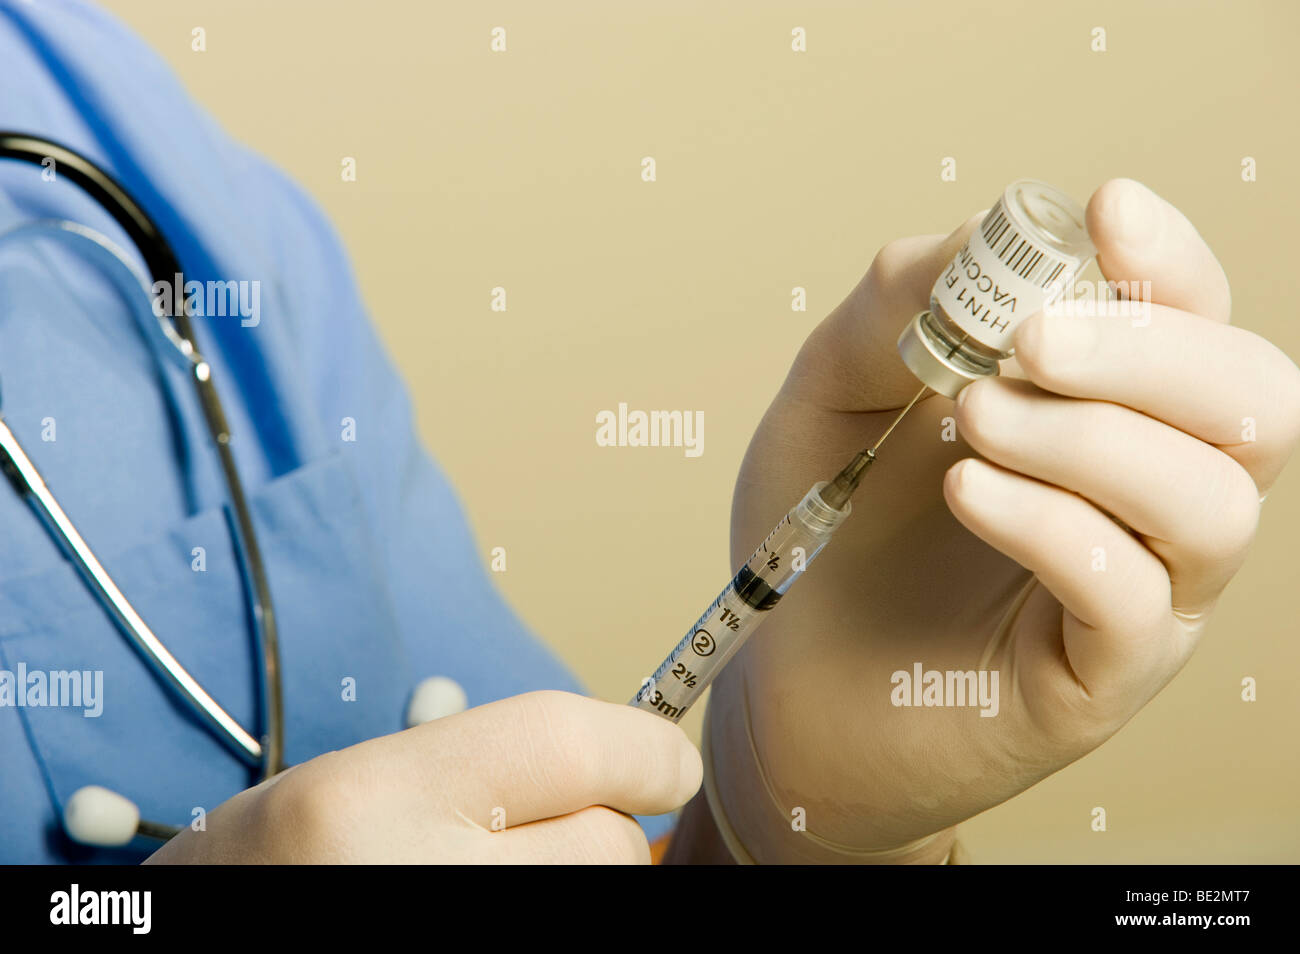 Male doctor or nurse wearing blue scrubs, stethoscope and gloves holding vial of H1N1 Swine Flu vaccine and syringe. Stock Photo